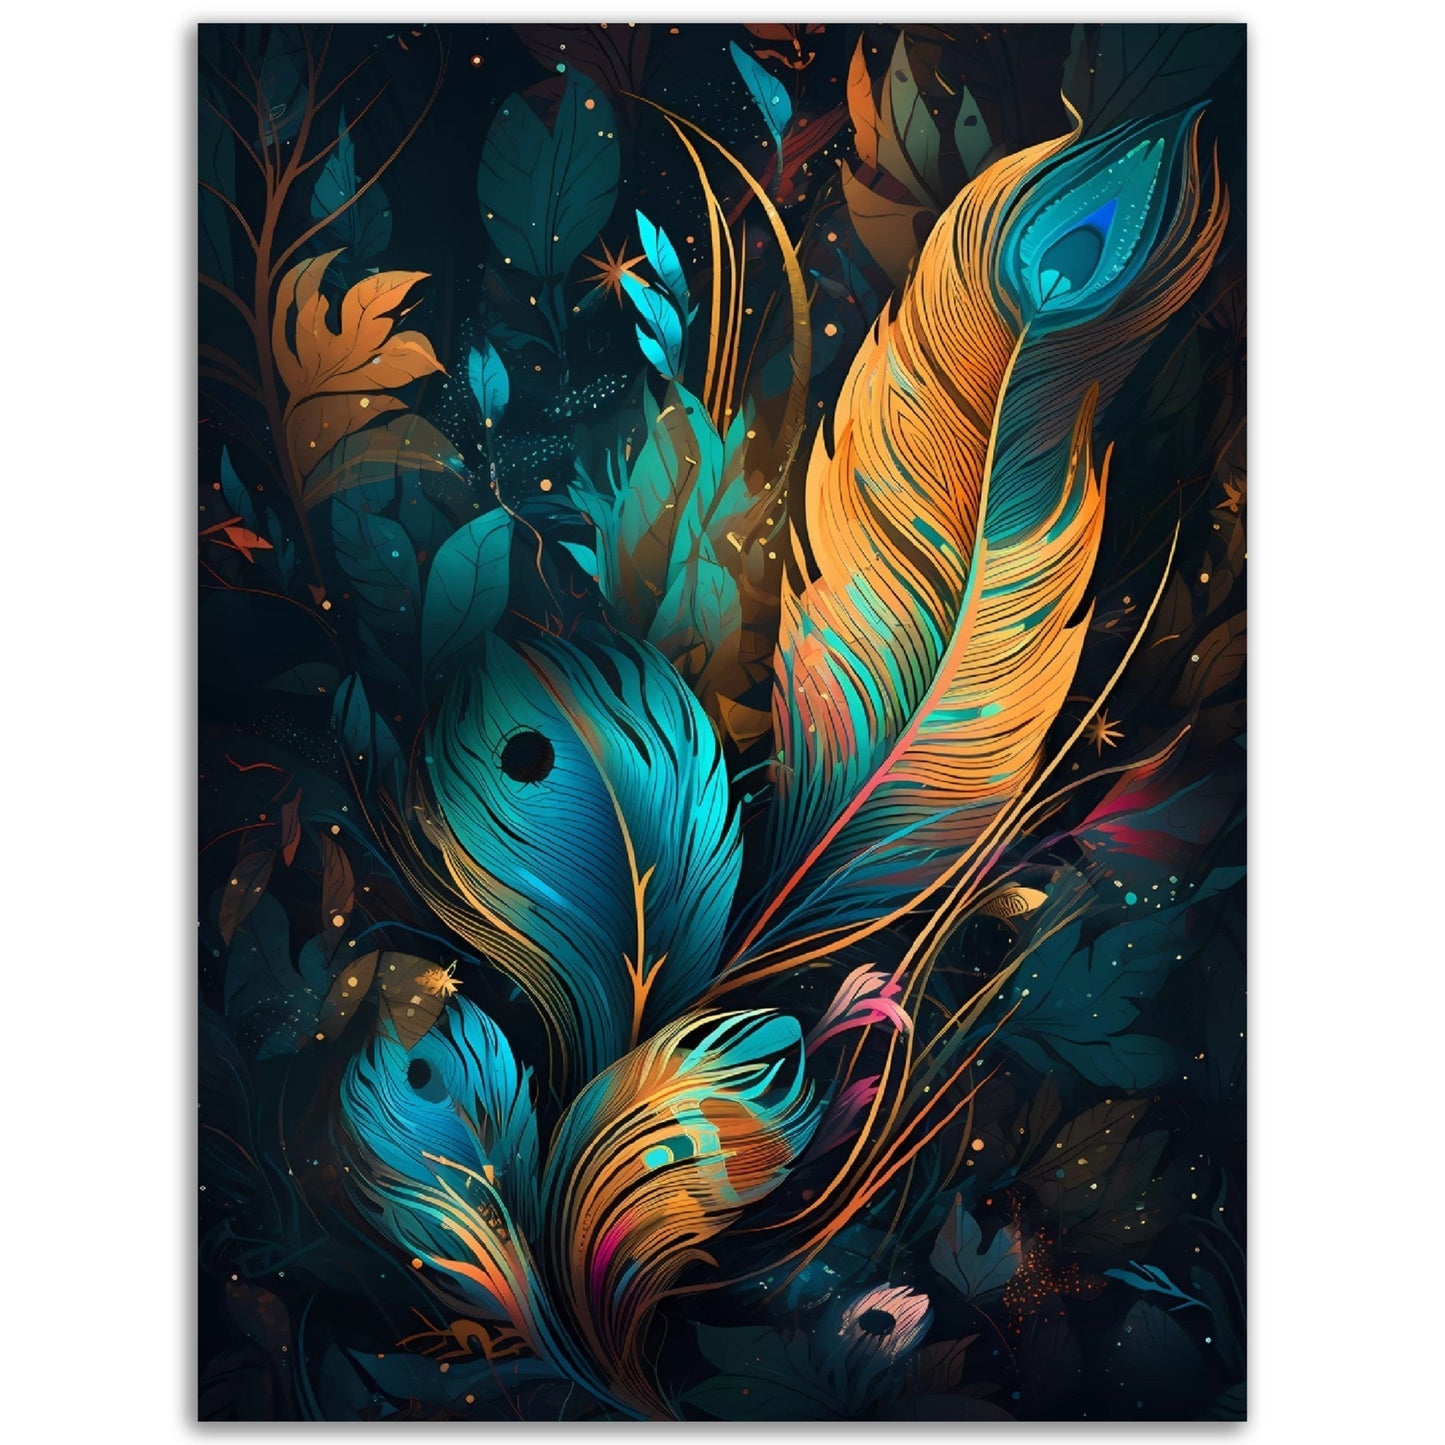 Elegant Abstraction wall art featuring peacock feathers on a black background.